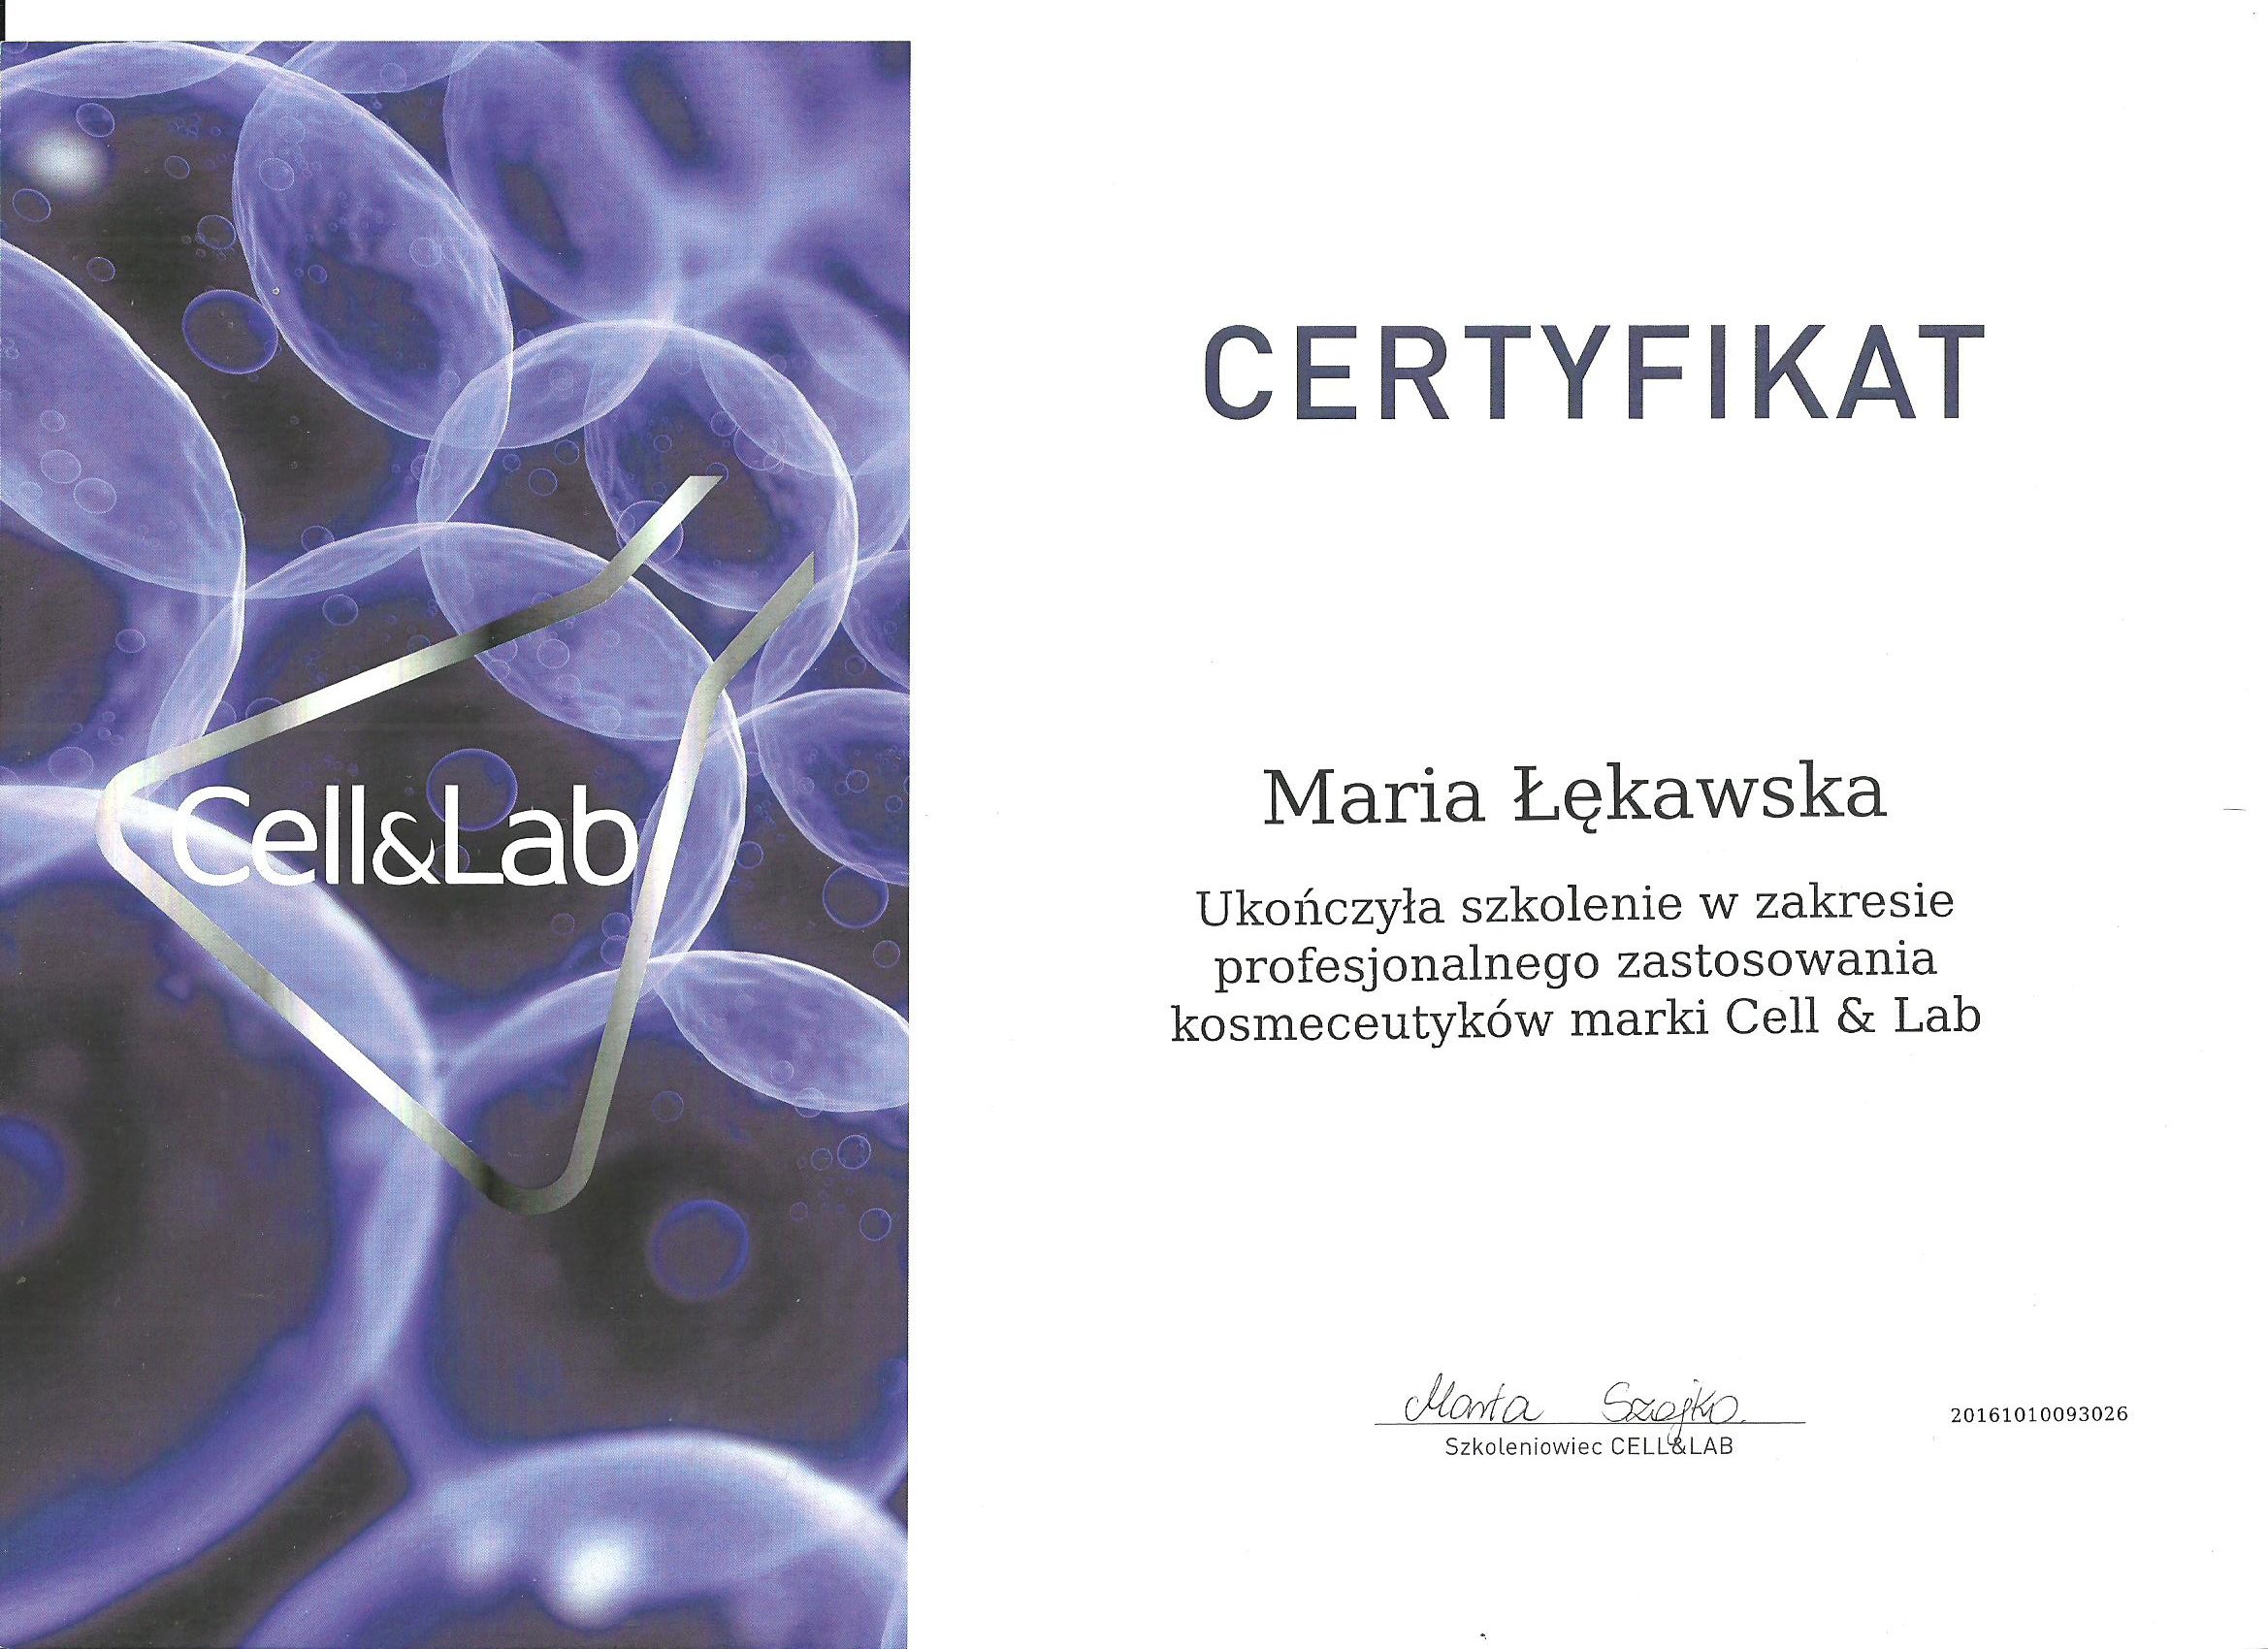 Cell&Lab